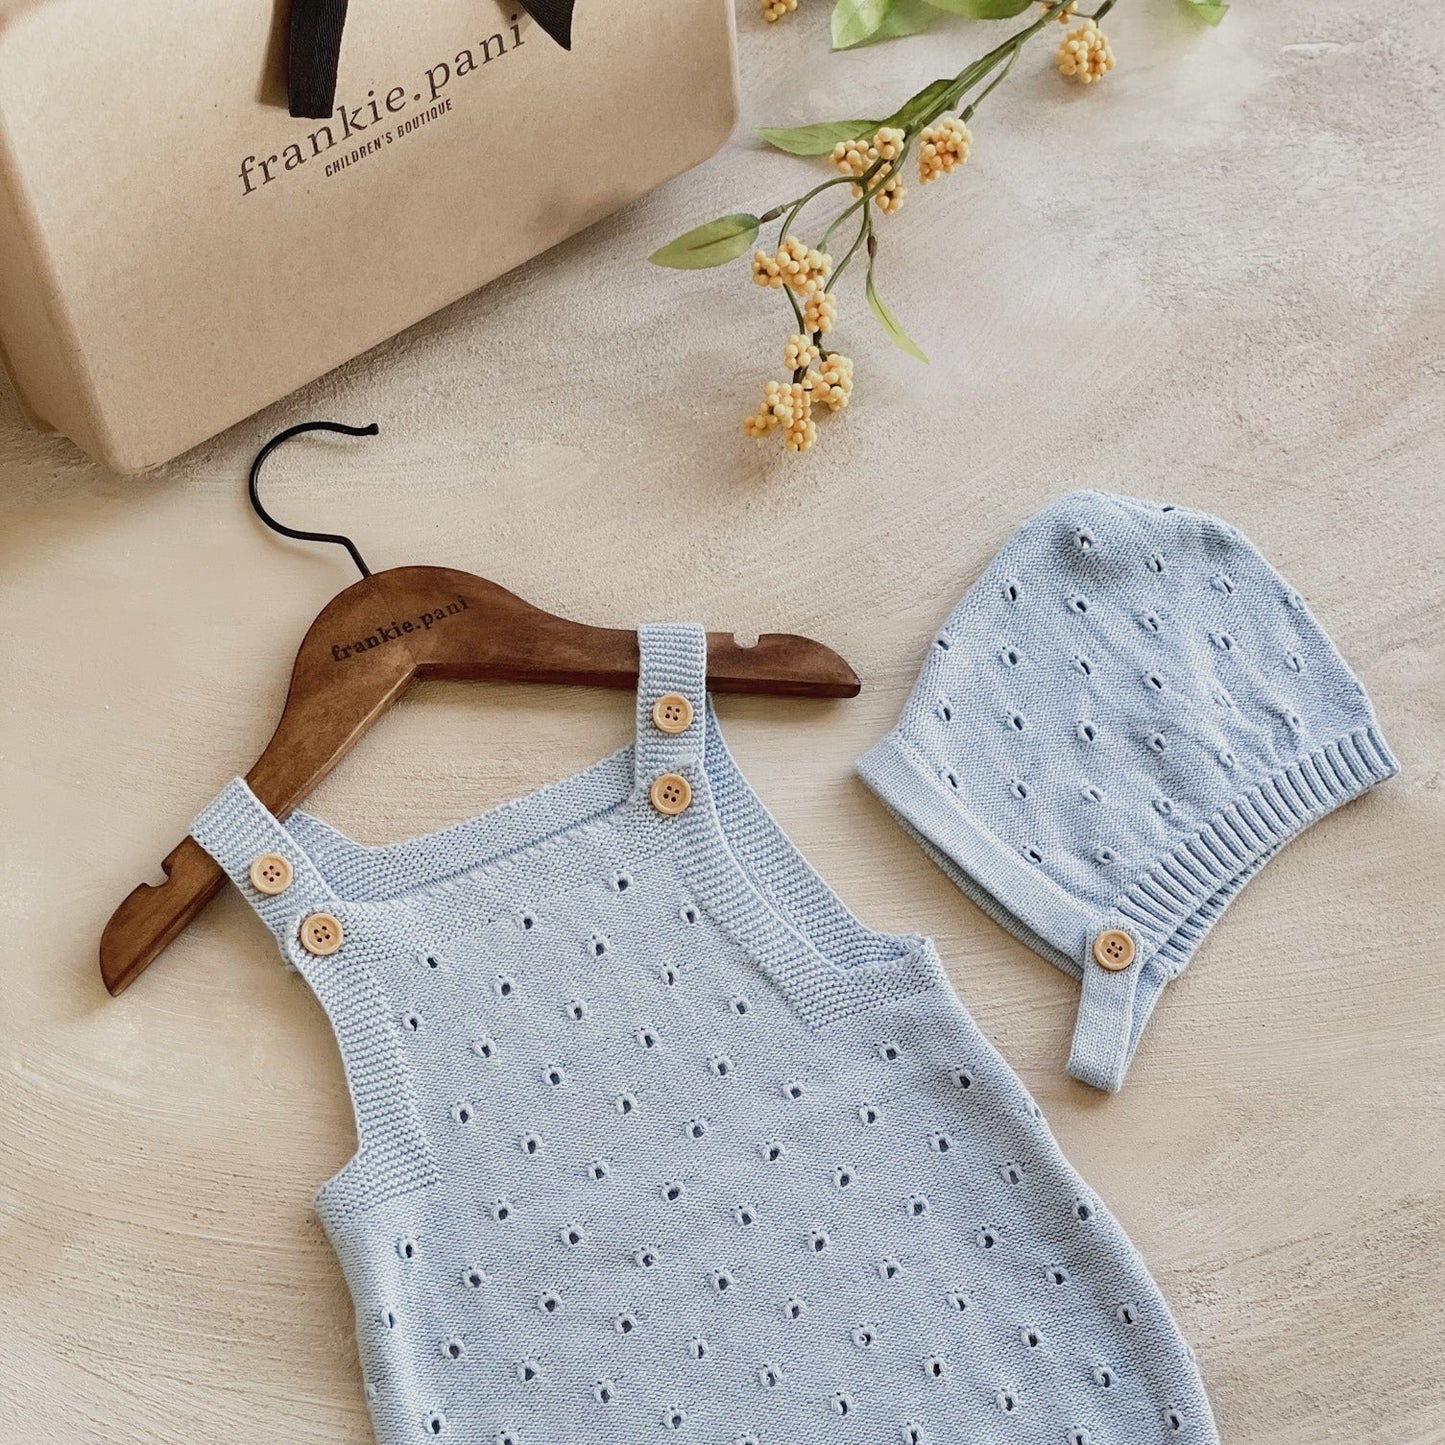 2 Piece 100% Cotton Baby Knitted Set Summer Sleeveless Romper and Hat